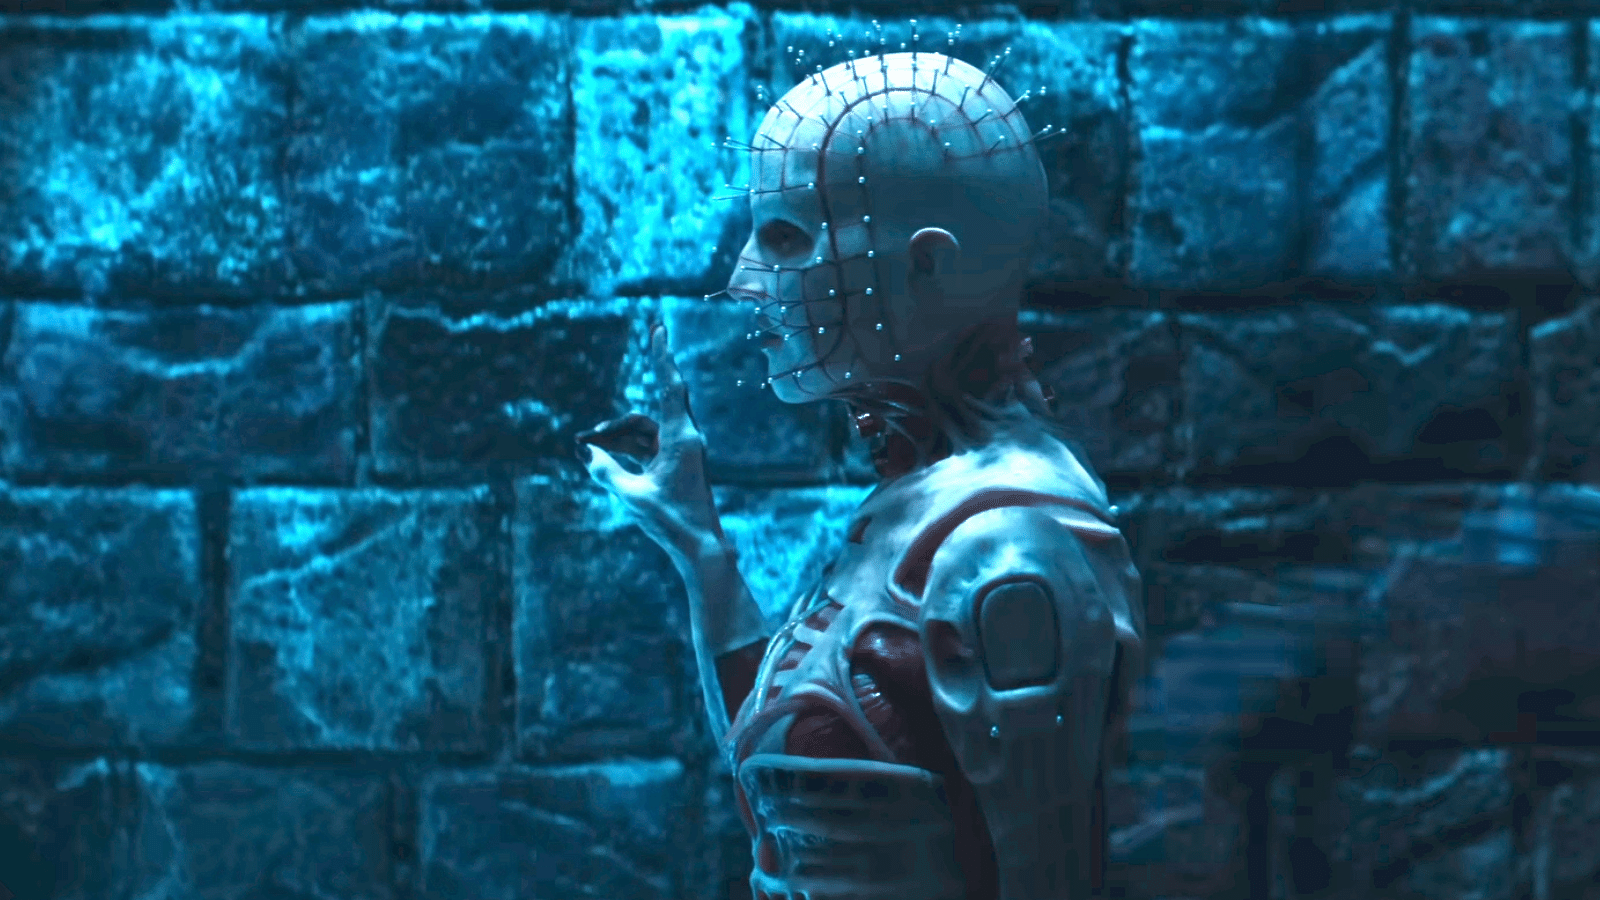 New 'Hellraiser' Actor Wants To See Fan Art Of Her Character